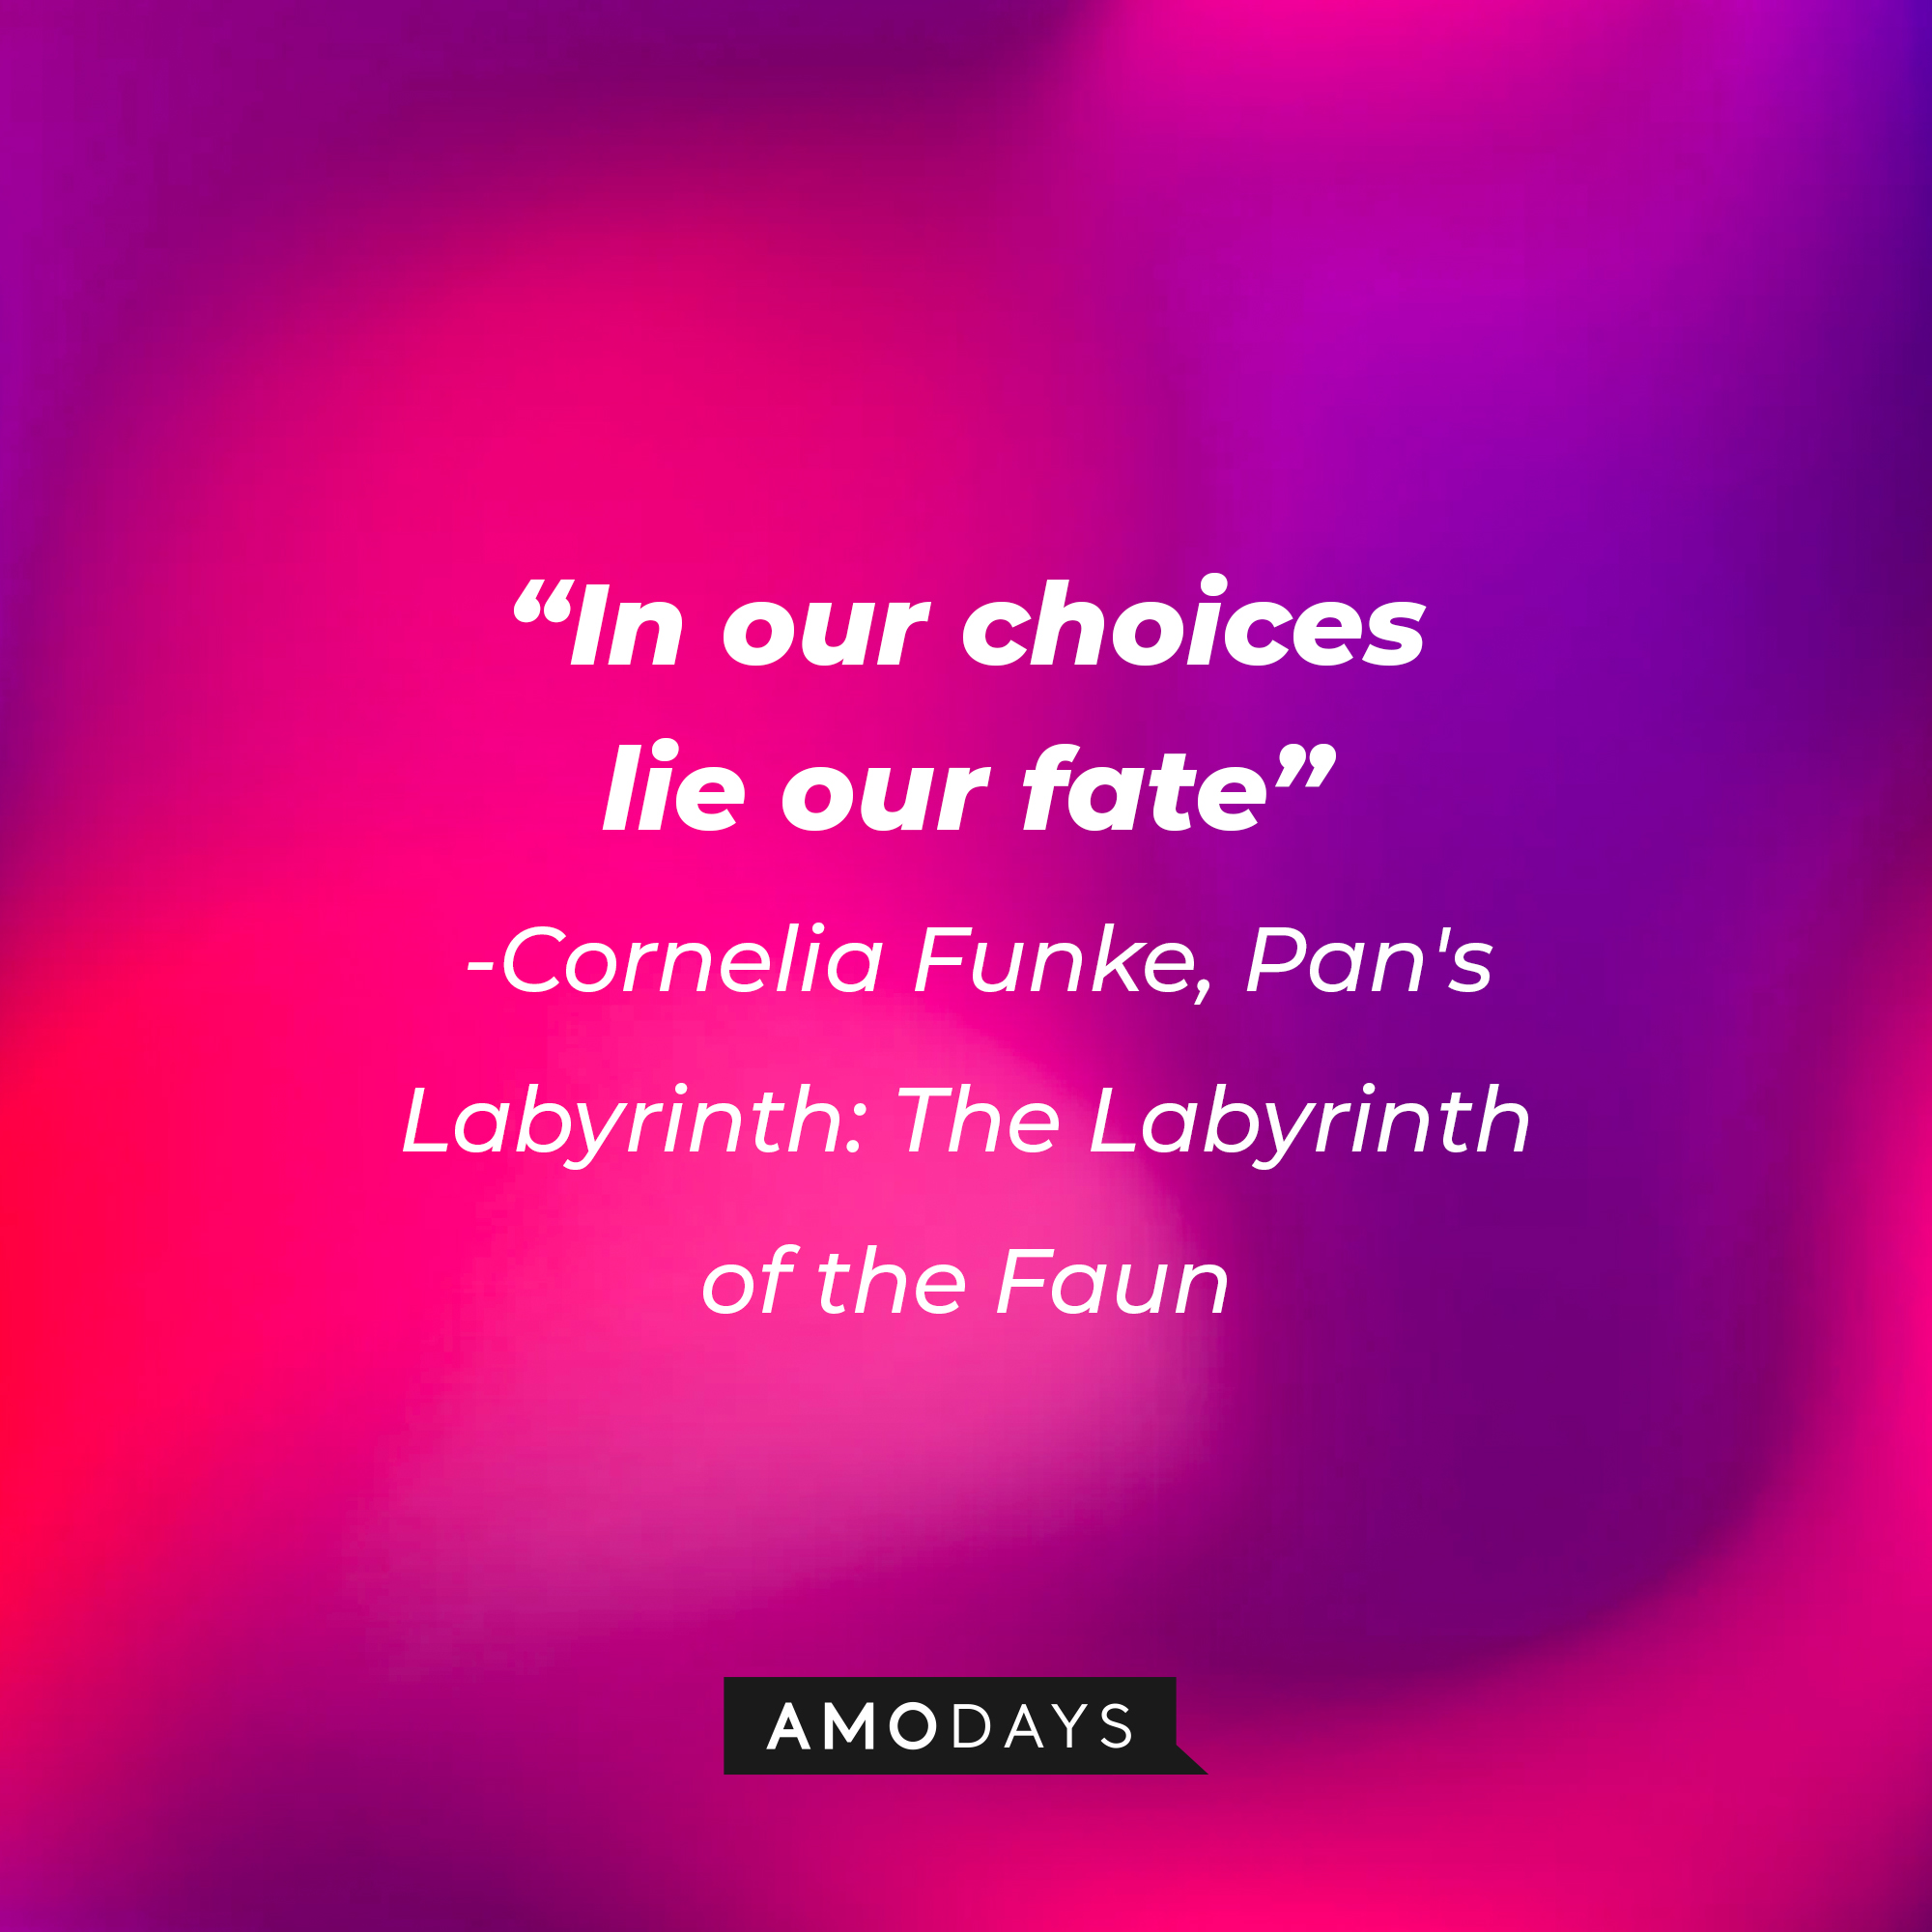 Cornelia Funke's quote: "In our choices lie our fate" | Image: Amodays